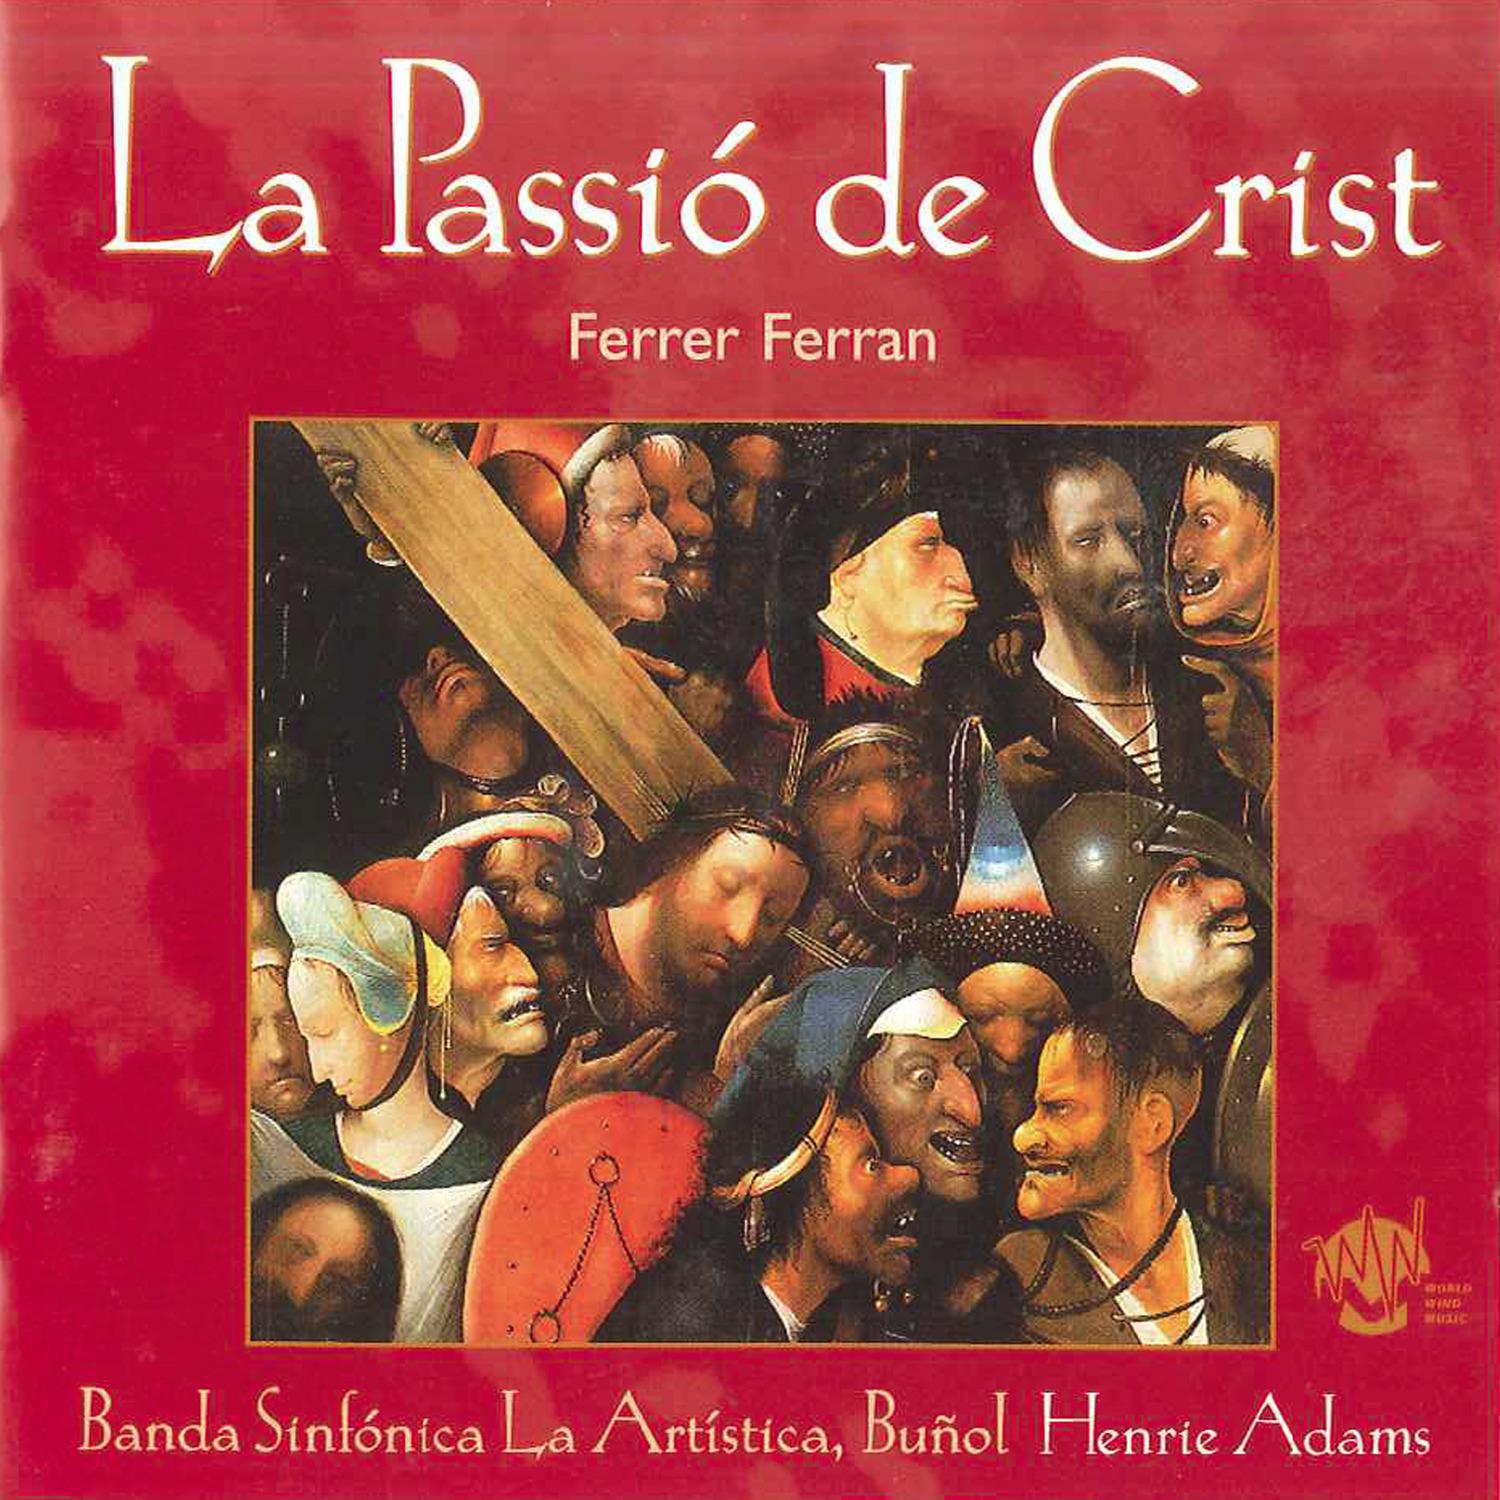 La Passio de Crist: III. The Arrival at the Temple, The Last Supper, The Arrest,  The Sentence, The Crucifixion, The Hope